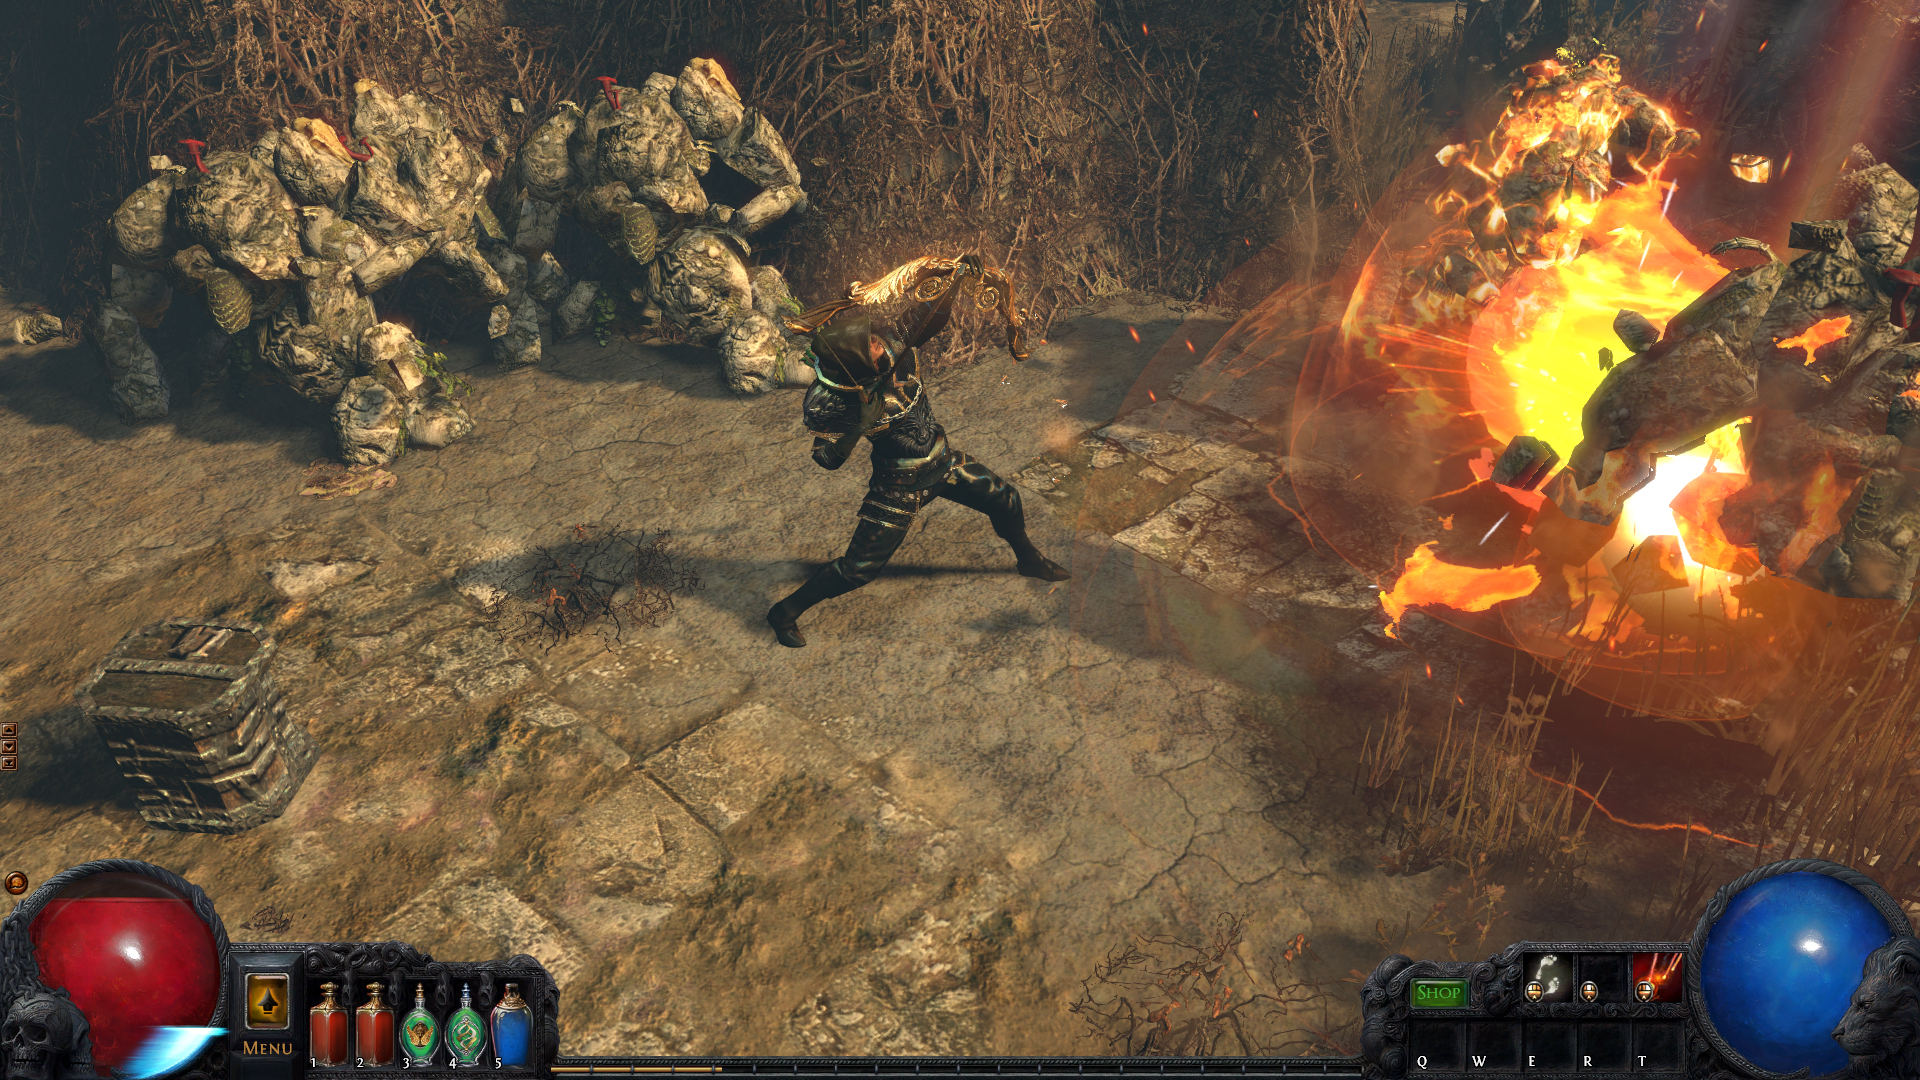 cool video game clones ripoffs - Path of Exile video game screenshot